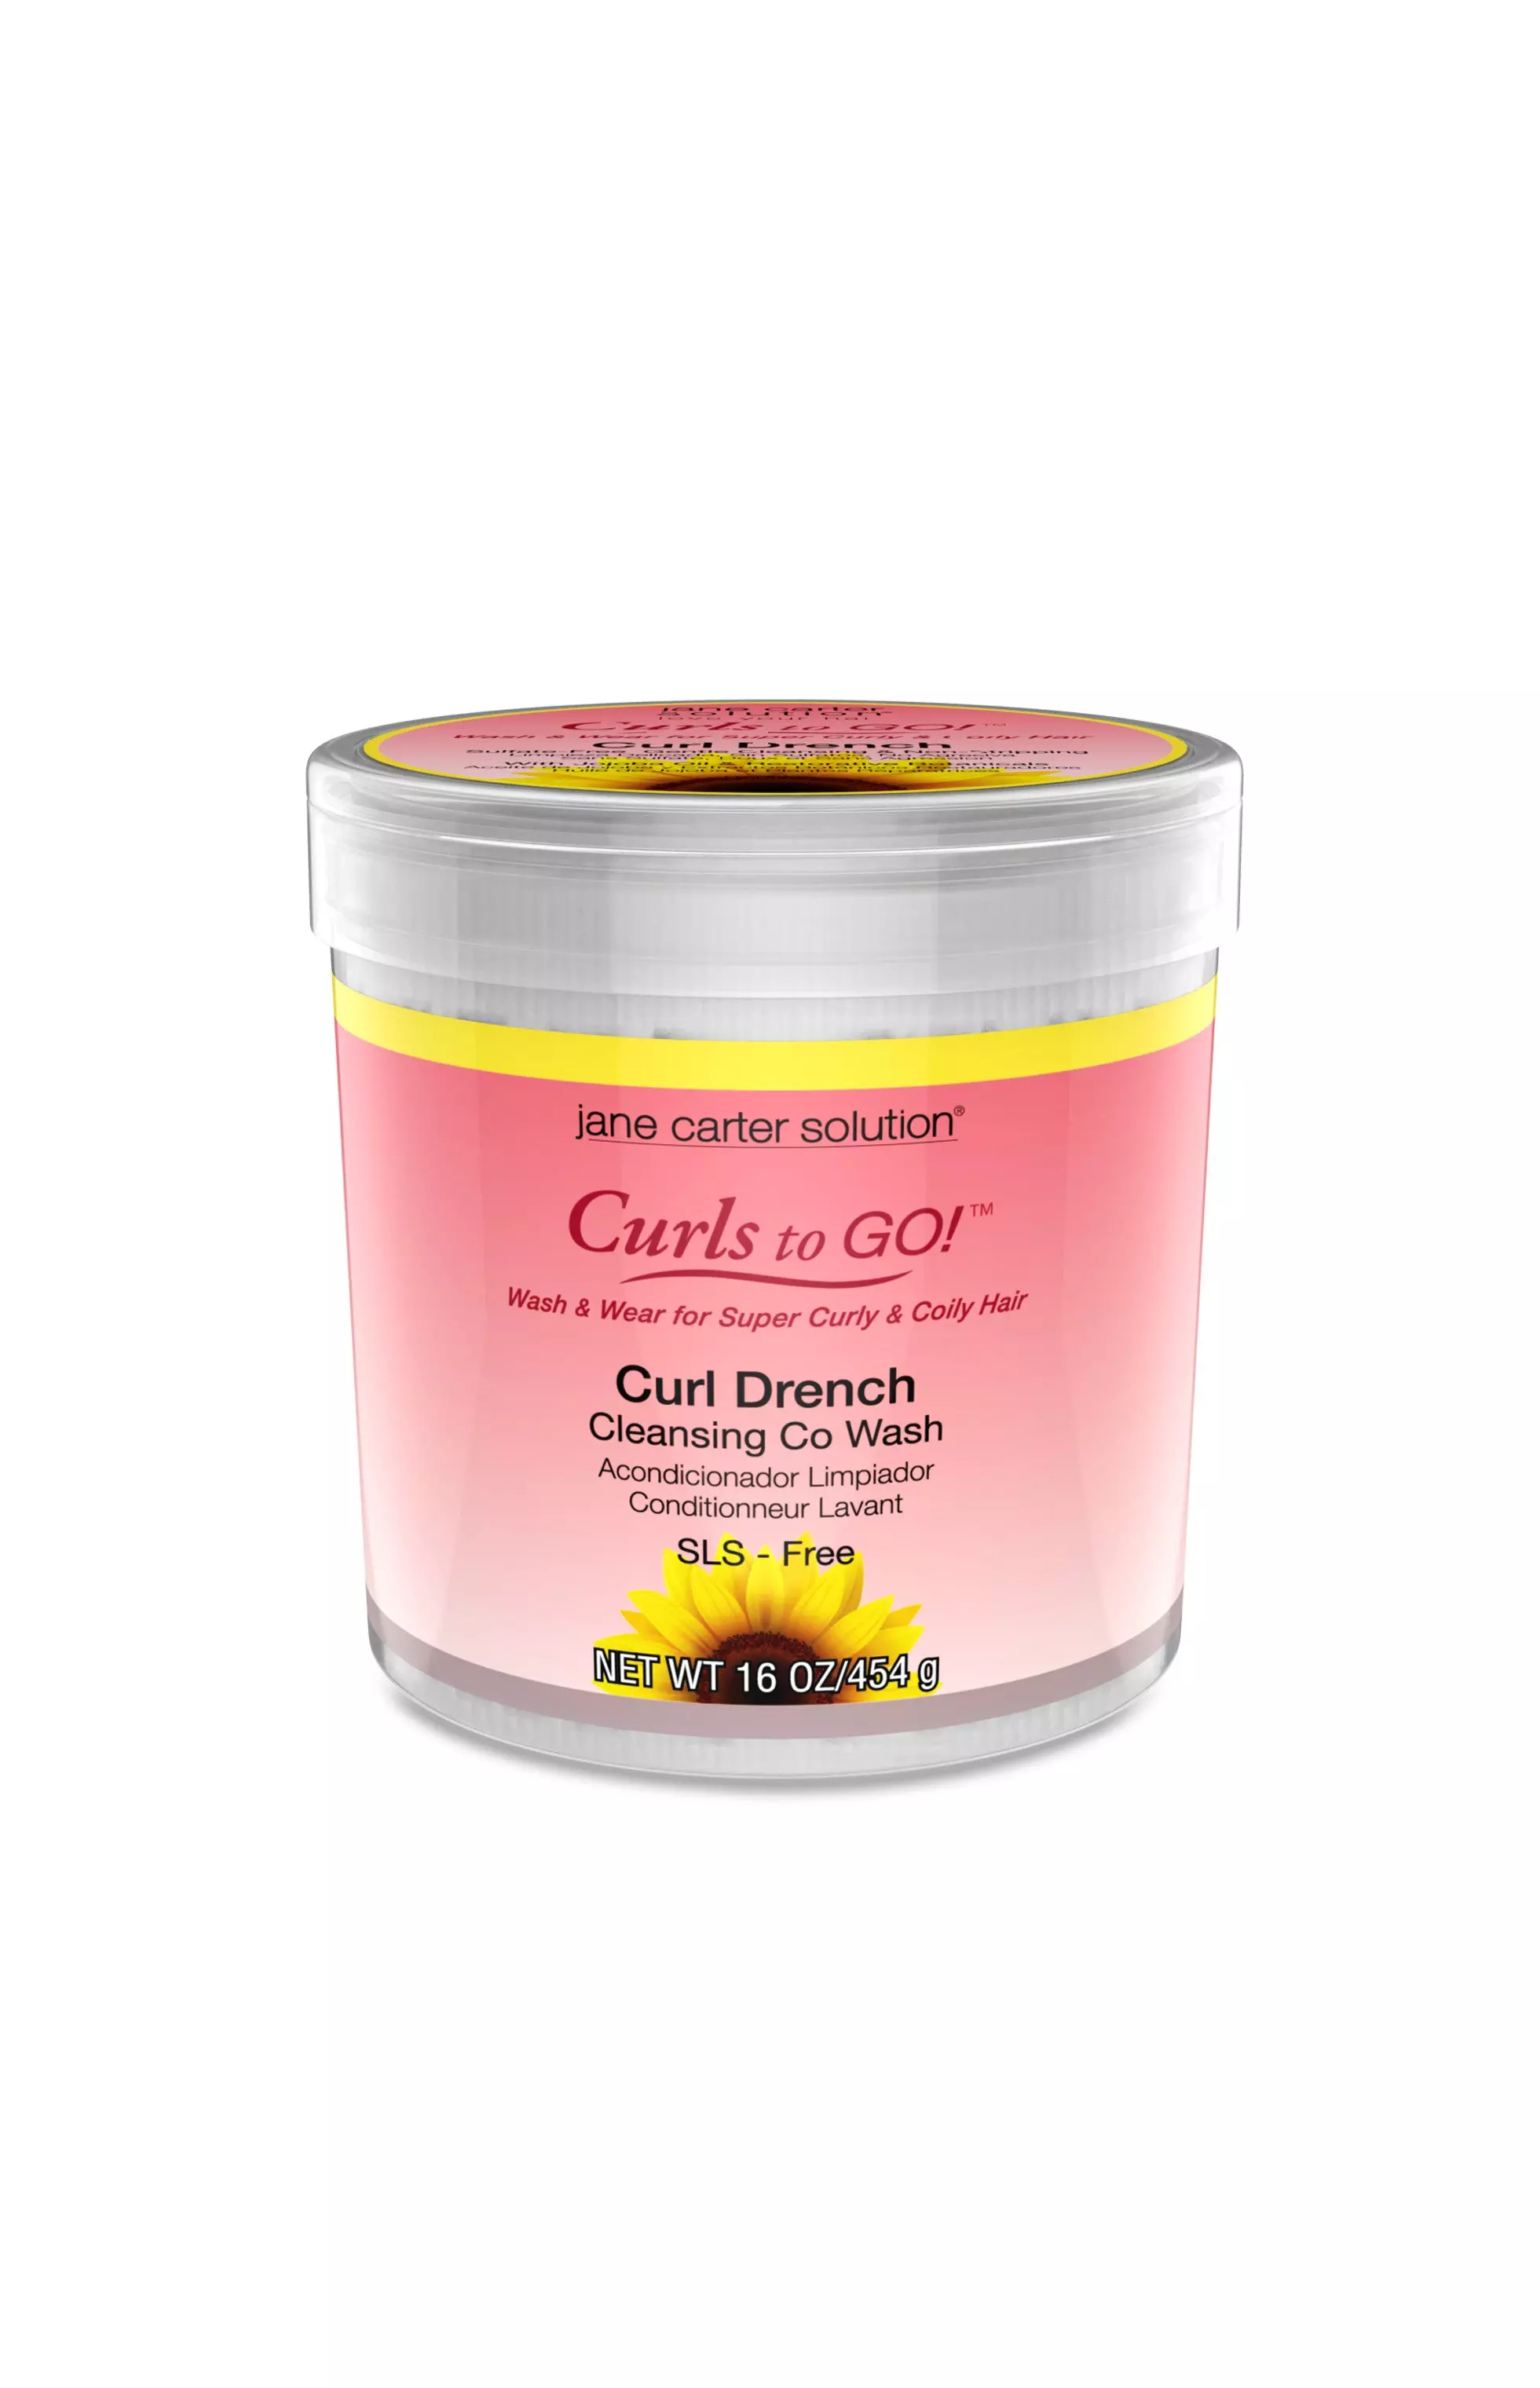 Jane Carter Solution Curl Drench Cleansing Co-Wash (16oz) - Hydrating, Nourishing, Reduce Frizz (Curl Drench)